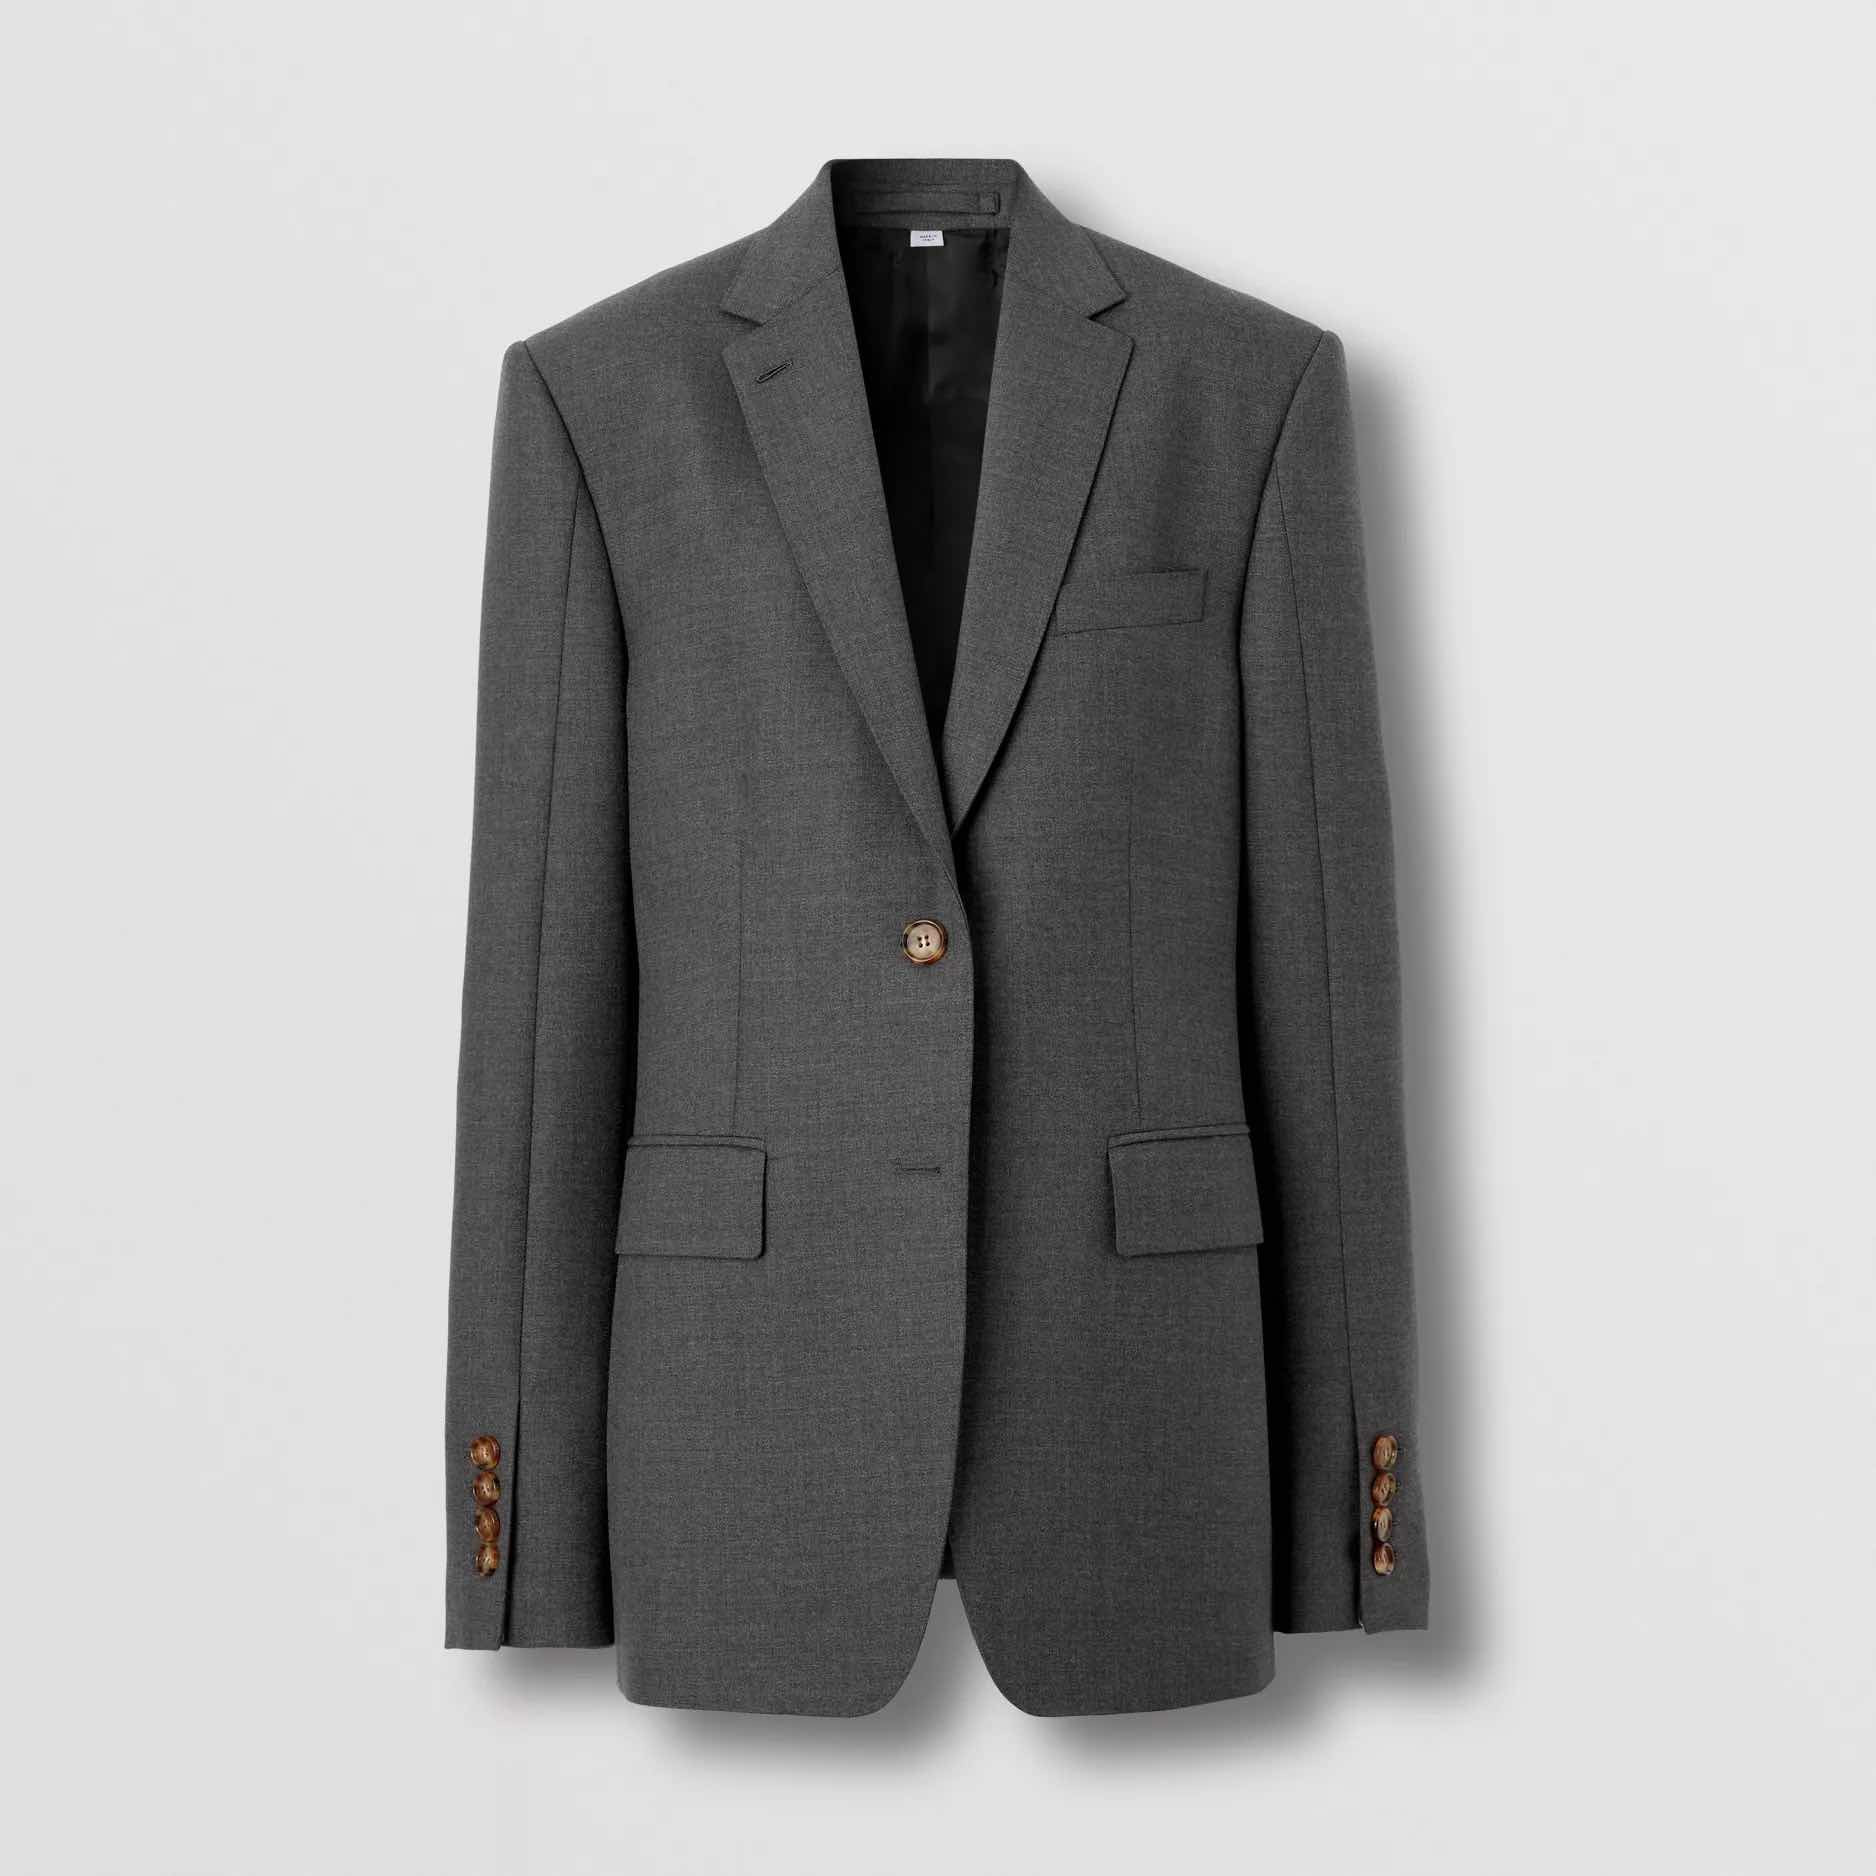 Relaxed Fit Wool Blend Blazer, Burberry, Rs 169956 approx 